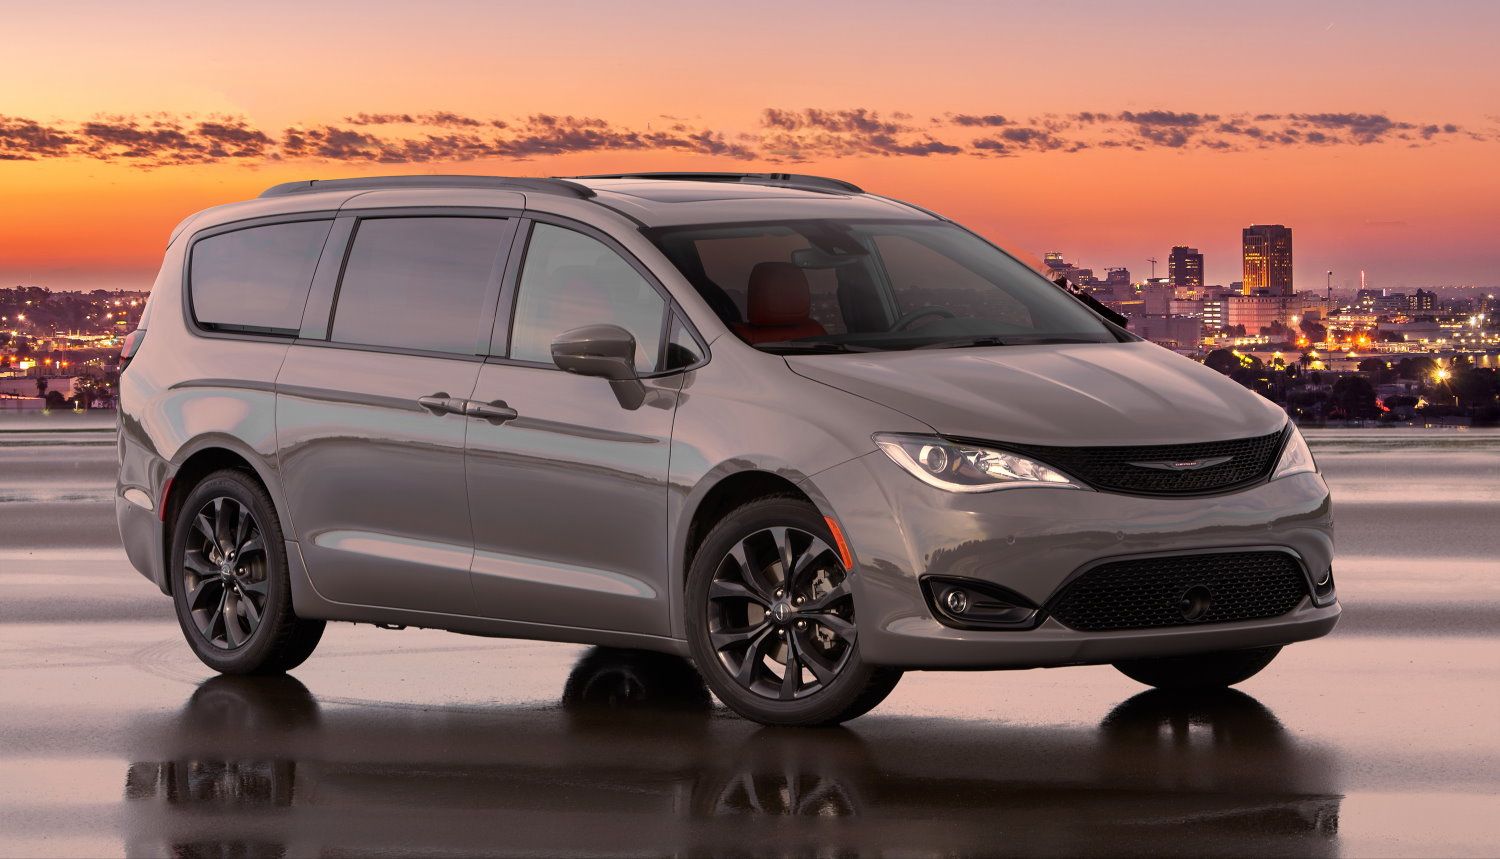 Chrysler is turning up the heat in the minivan segment, adding a new Red S Edition for the 2020 model year.